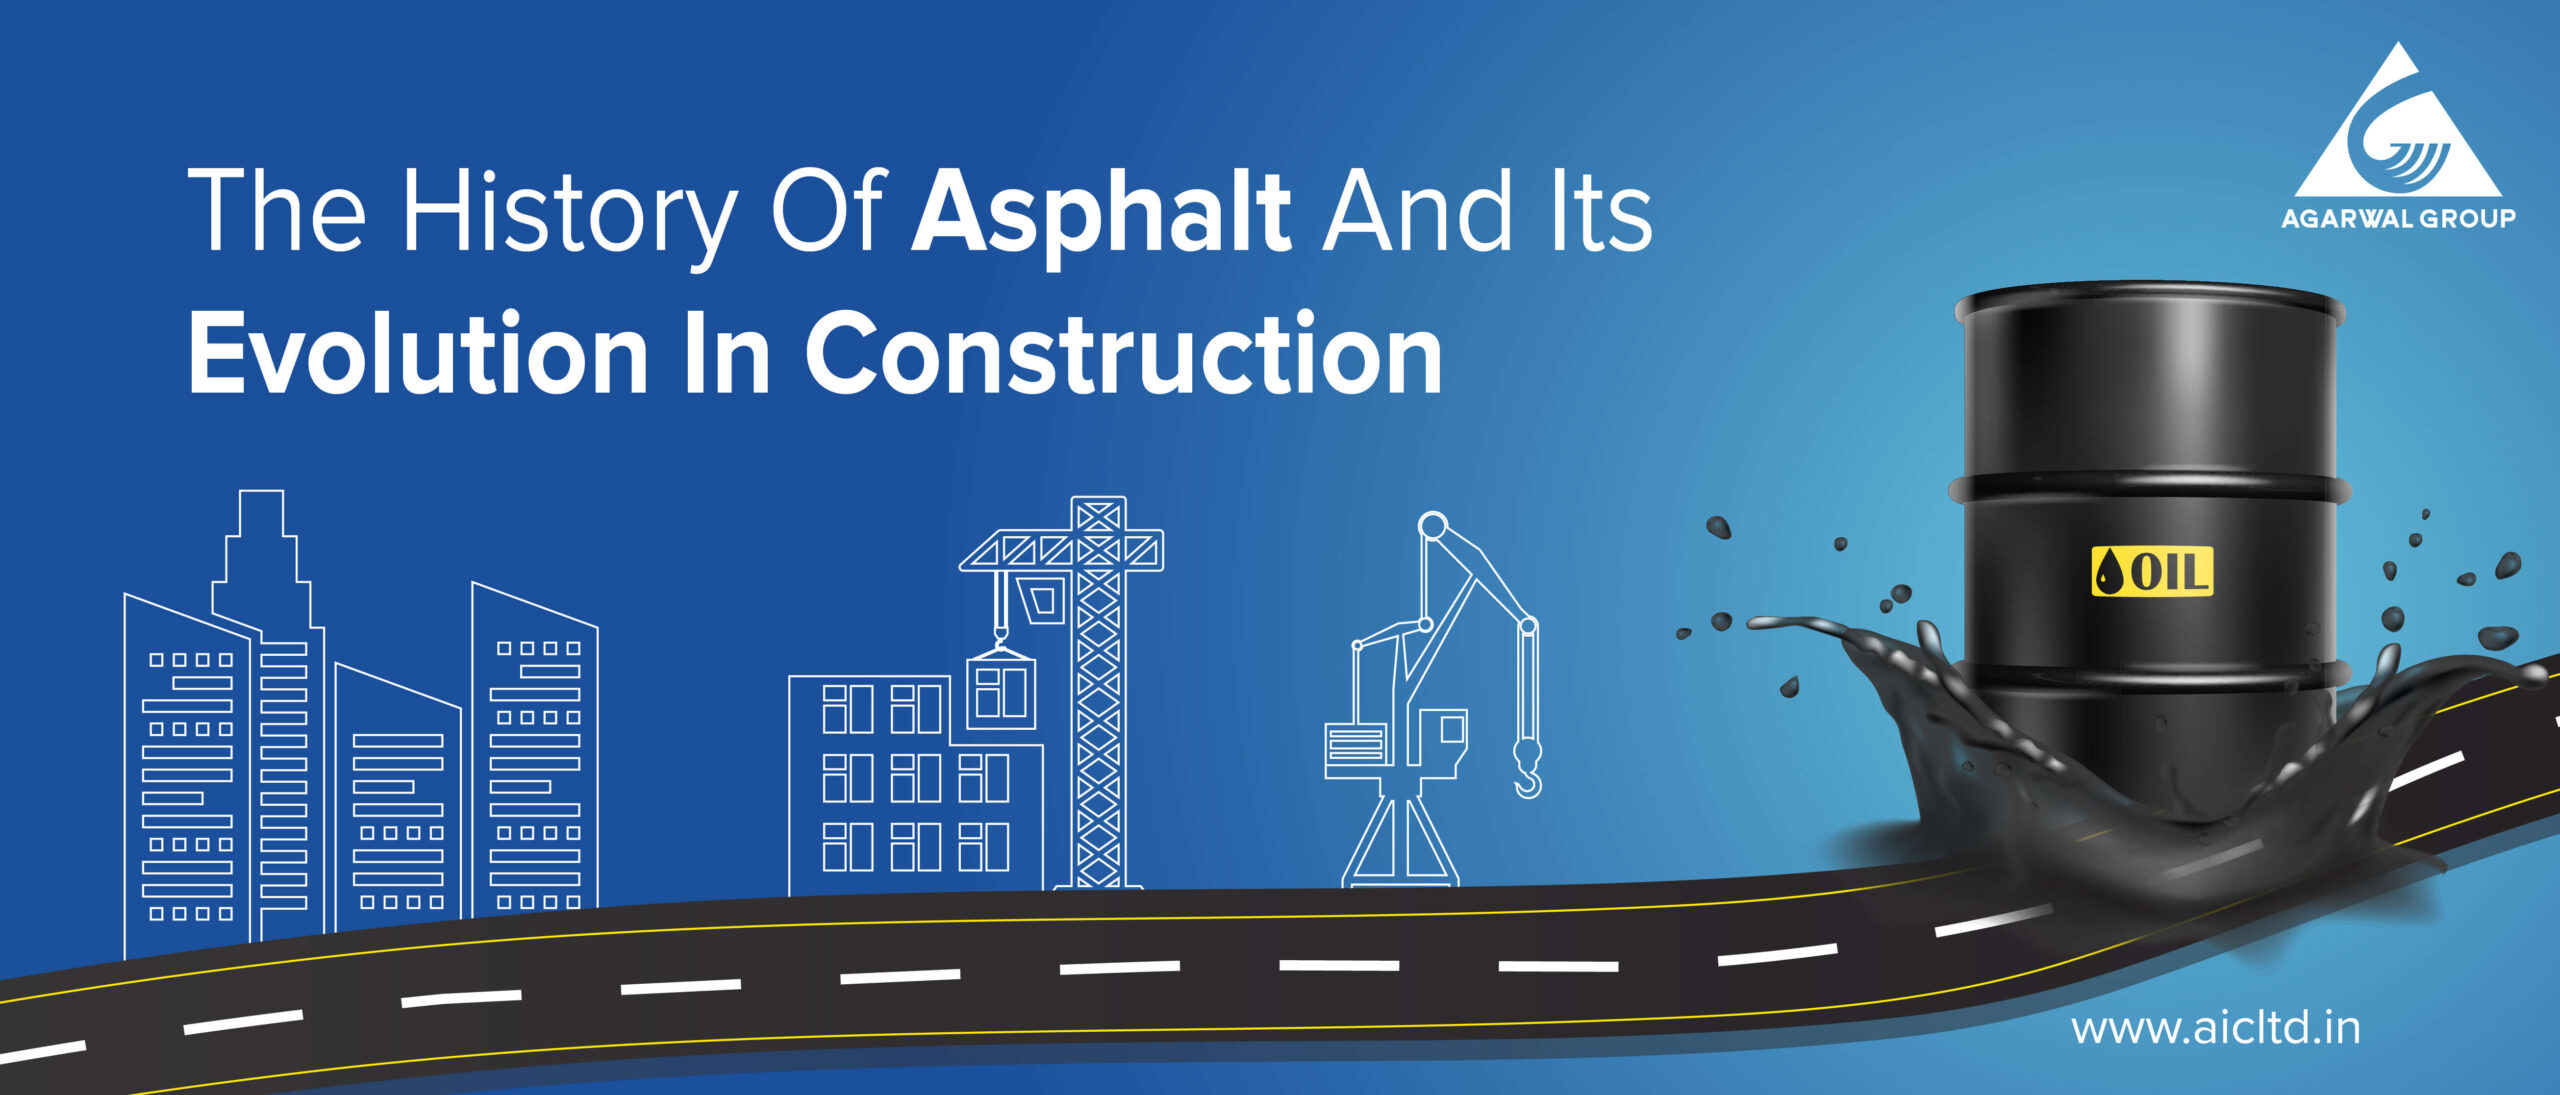 The History Of Asphalt And Its Evolution In Construction